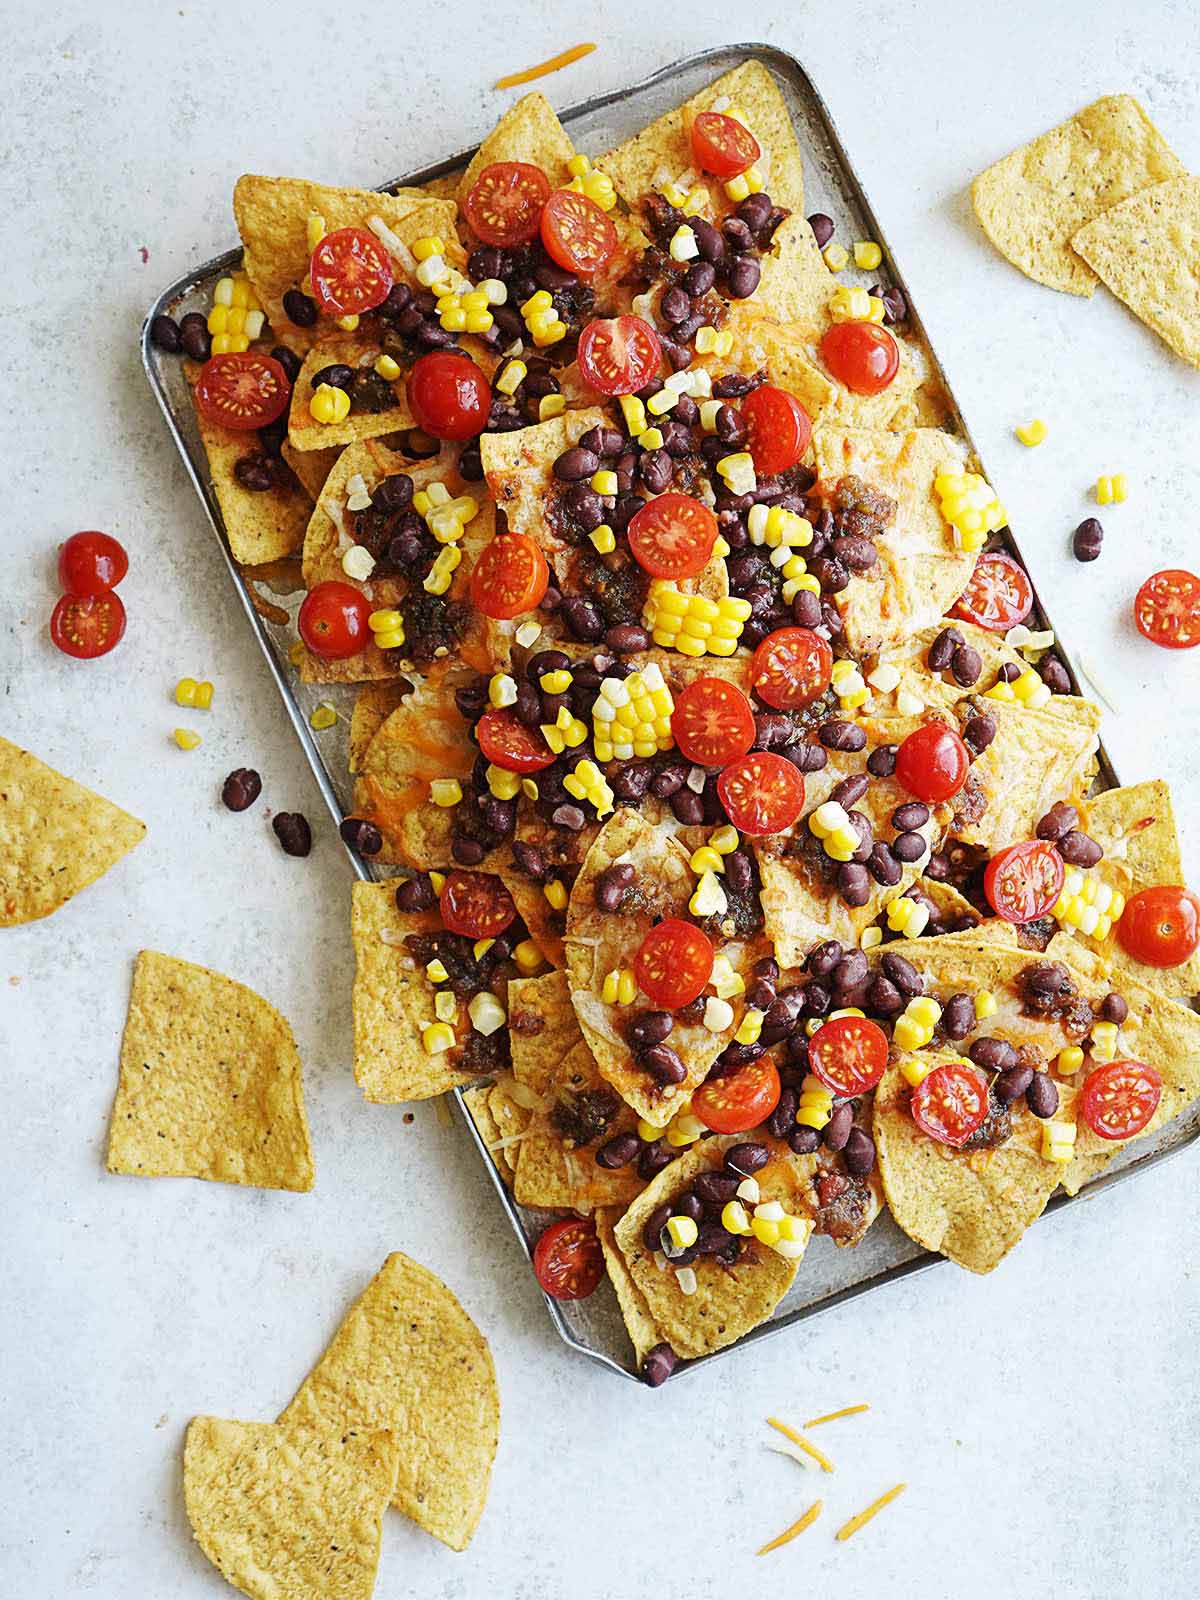 A baking tray with tortilla chips baked with melted cheese topped with tomatoes, black beans & corn kernels.